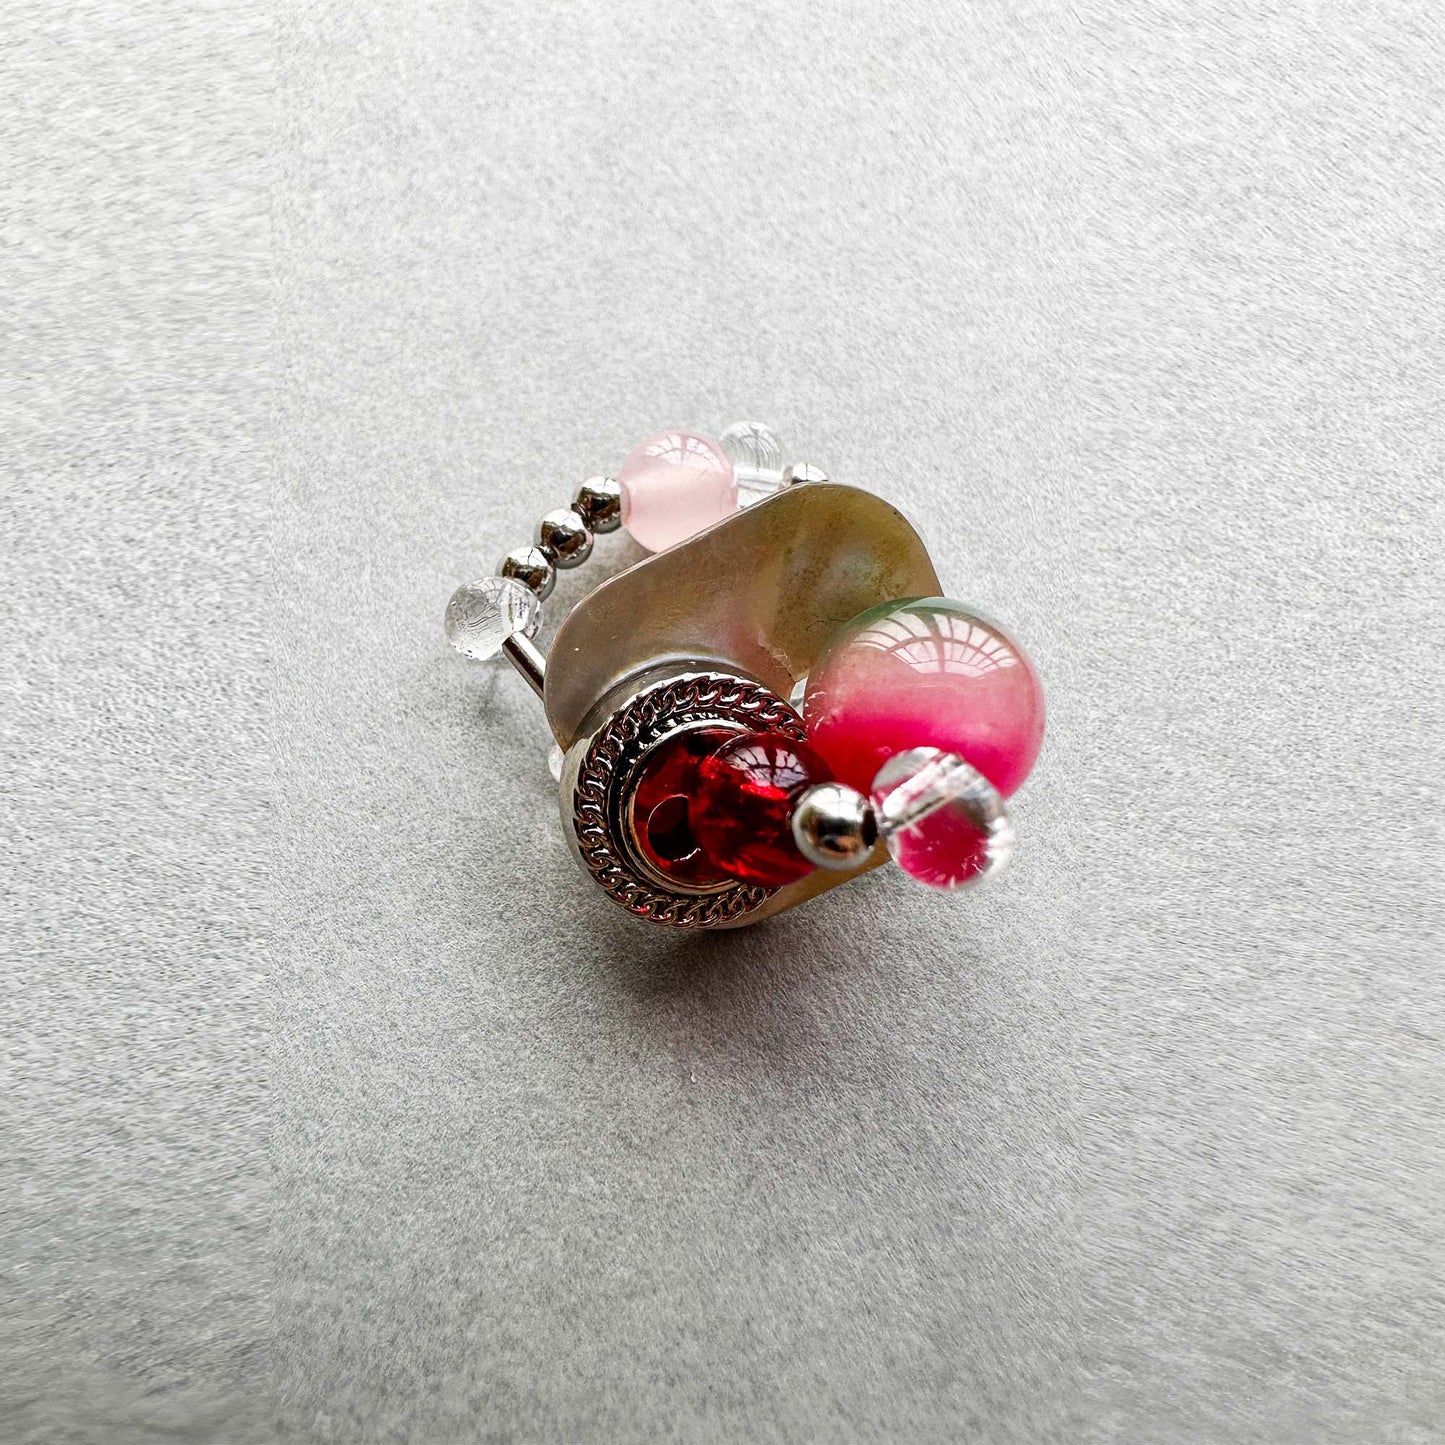 Oblique side view of handmade ring made of seashell, colored glaze, natural stone